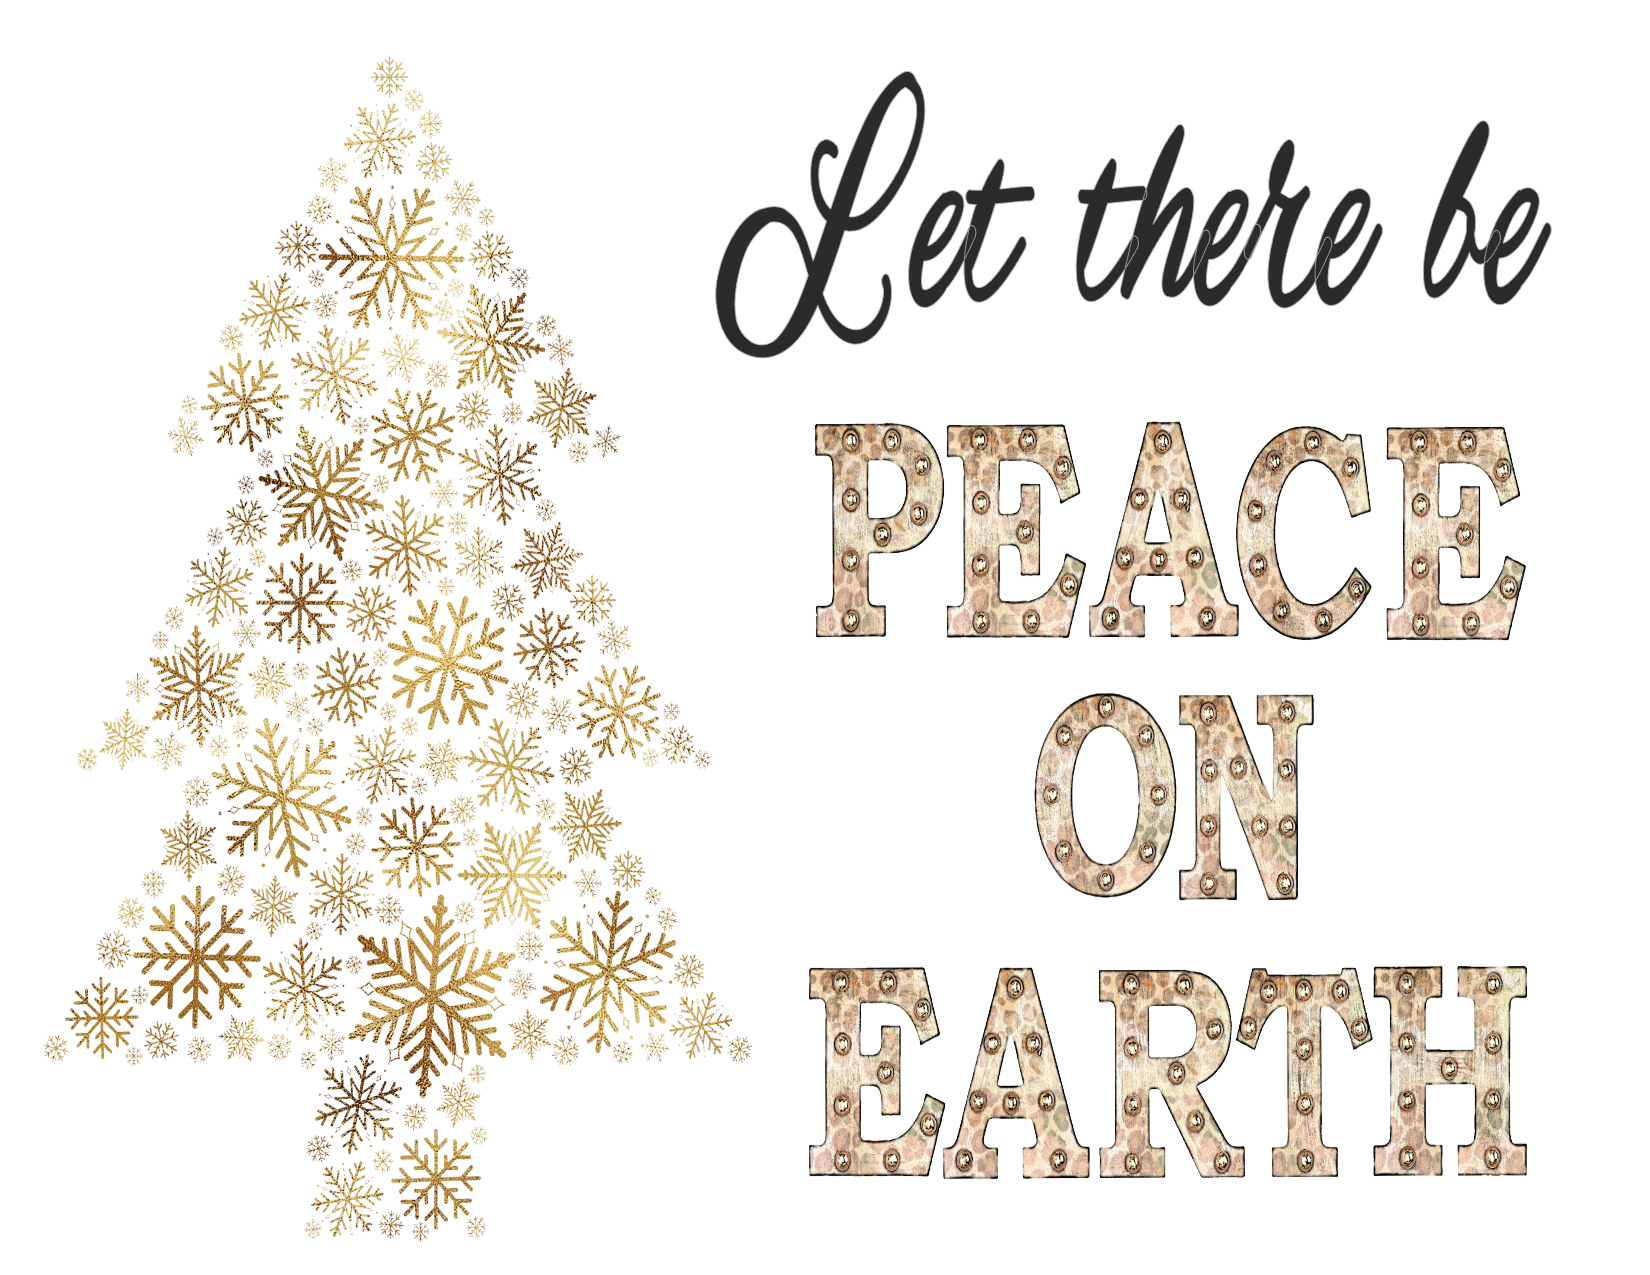 #140 Let there be Peace On Earth